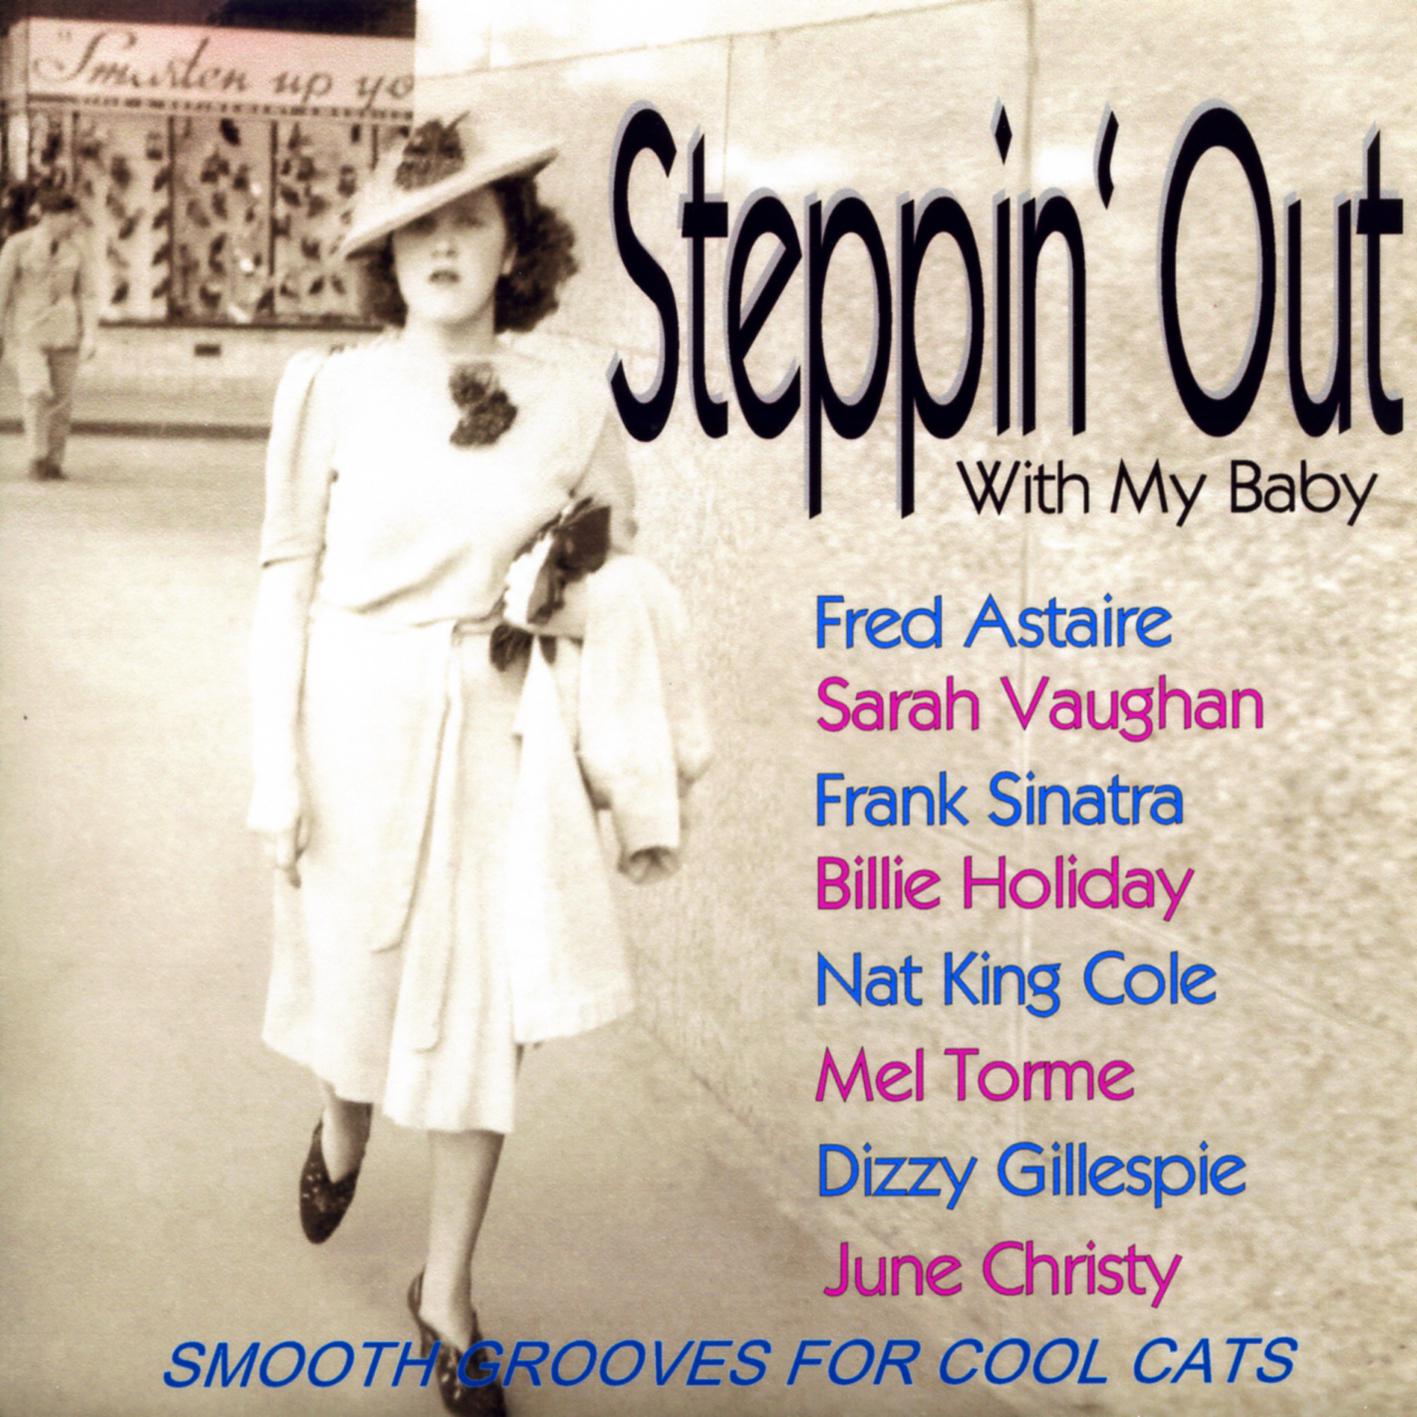 Steppin’ Out With By Baby